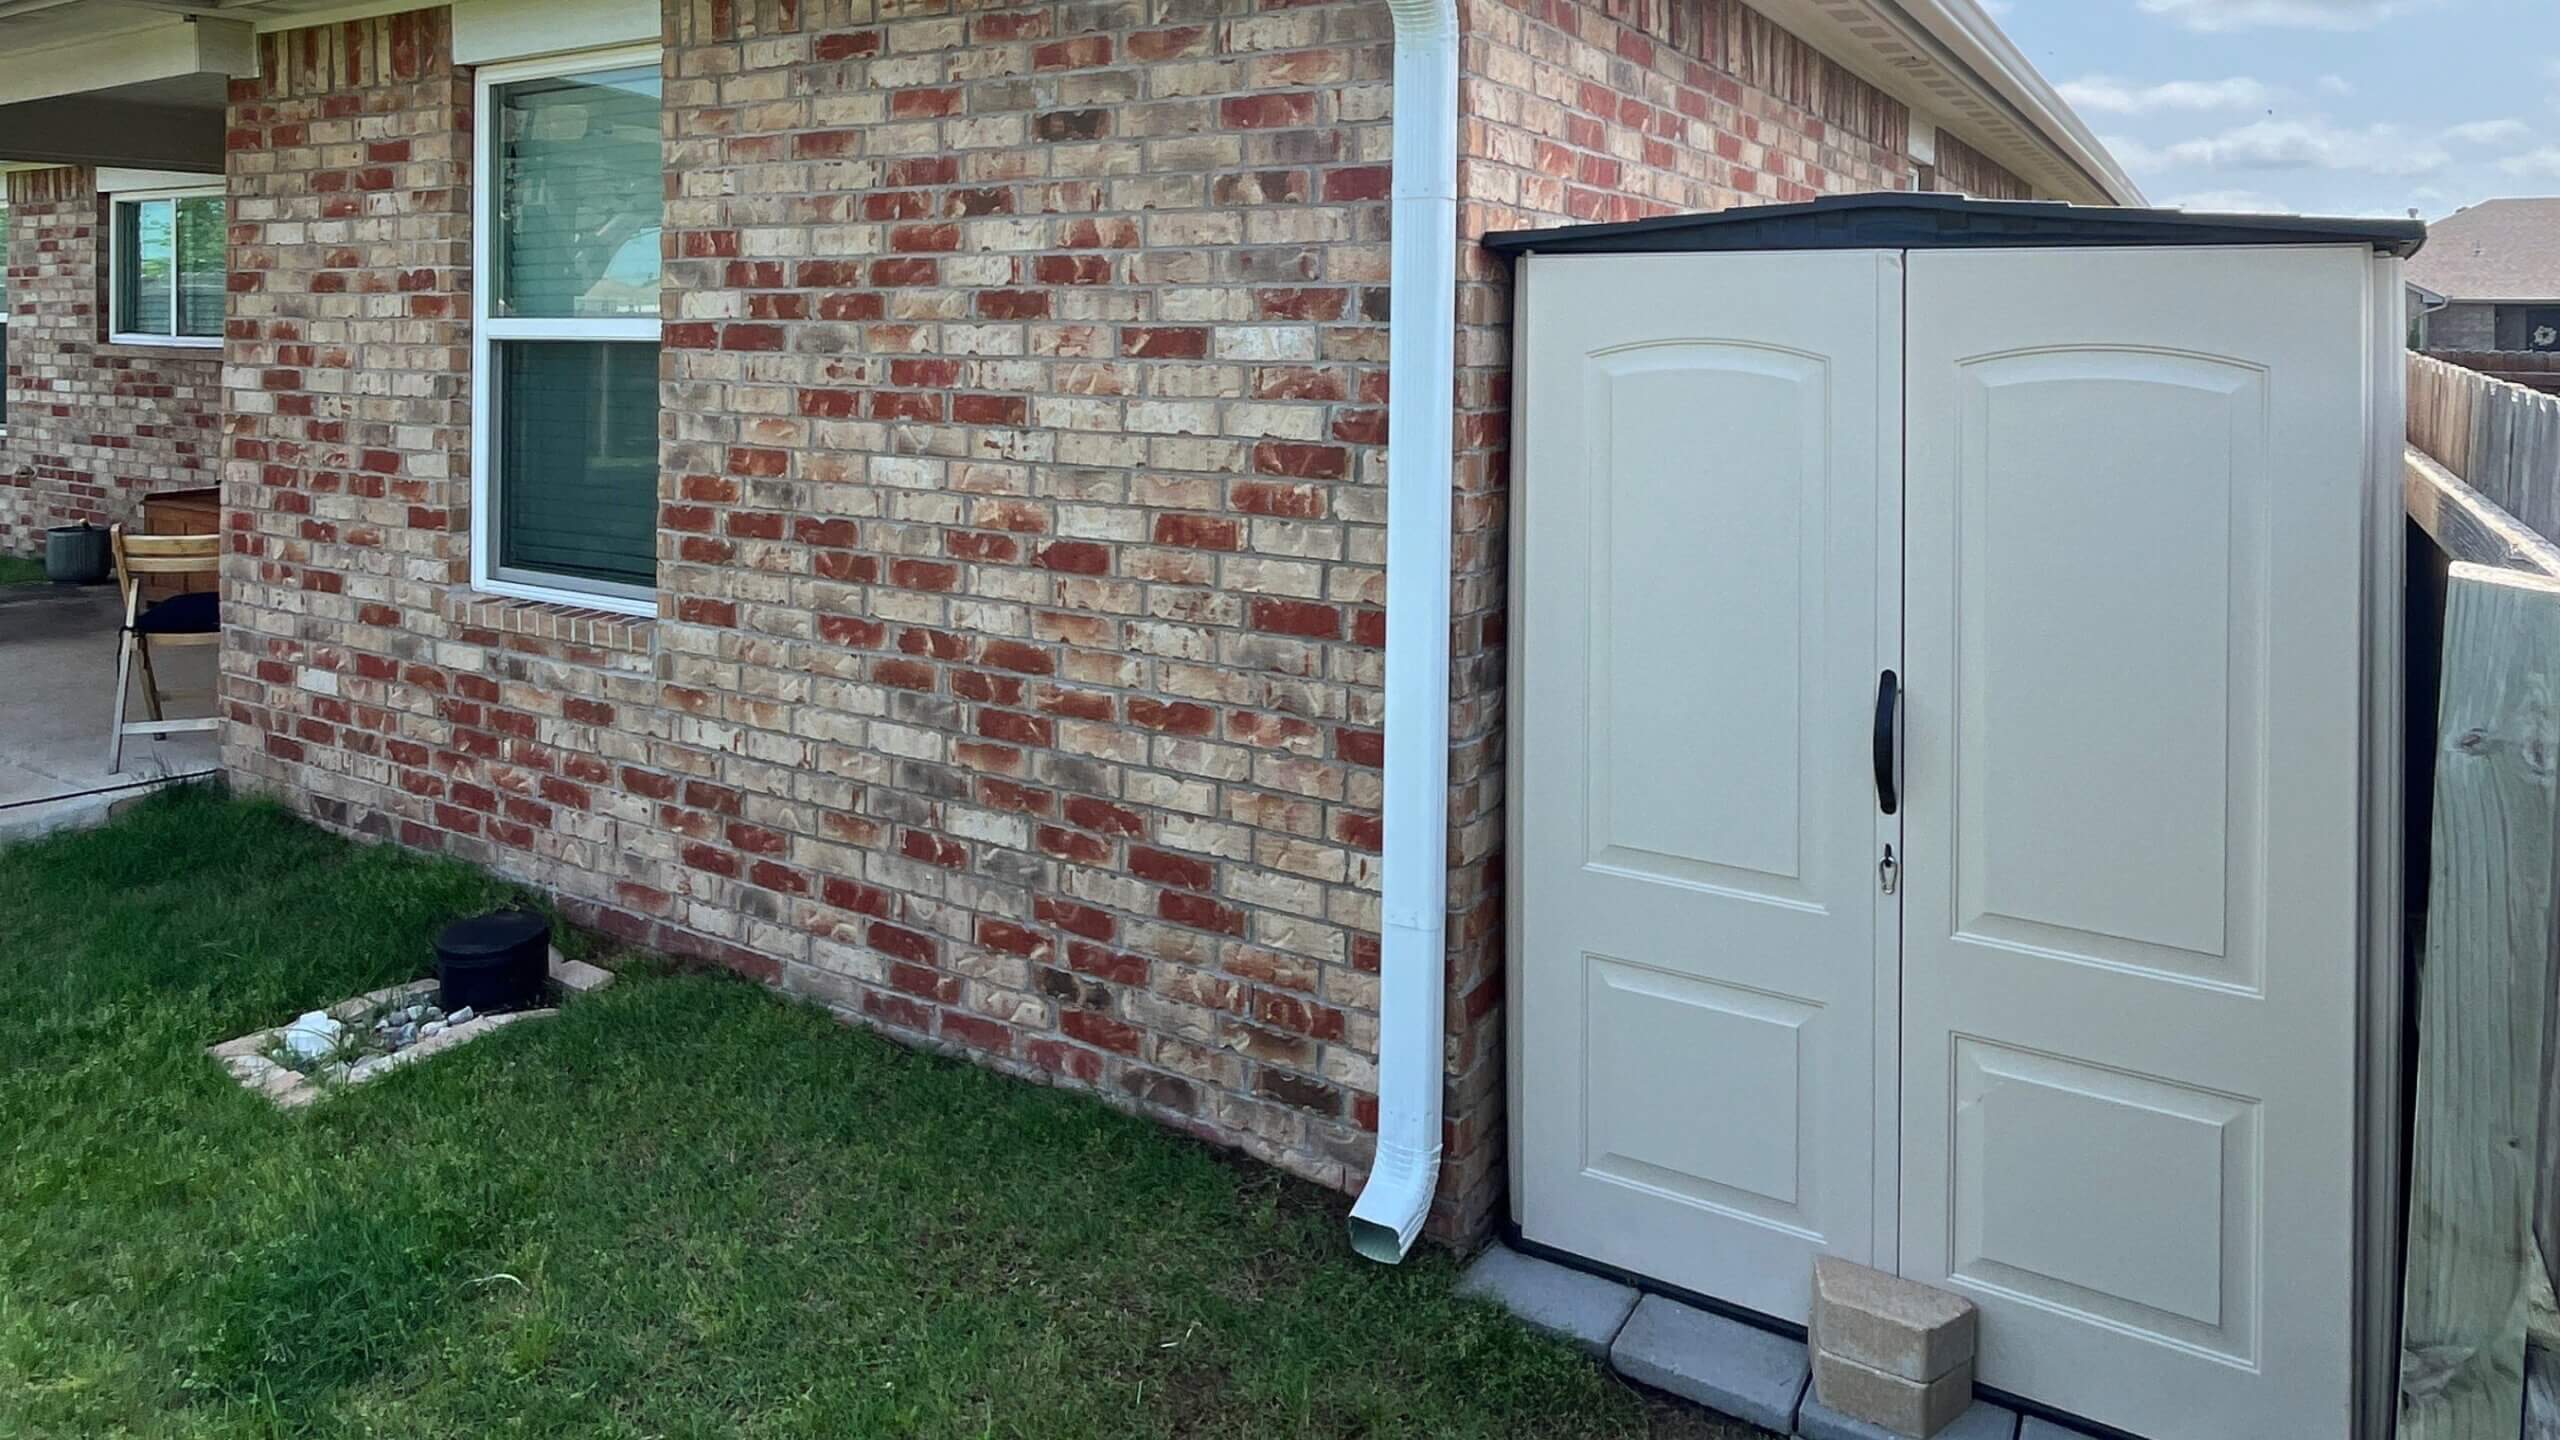 What Are Oversized Downspouts?